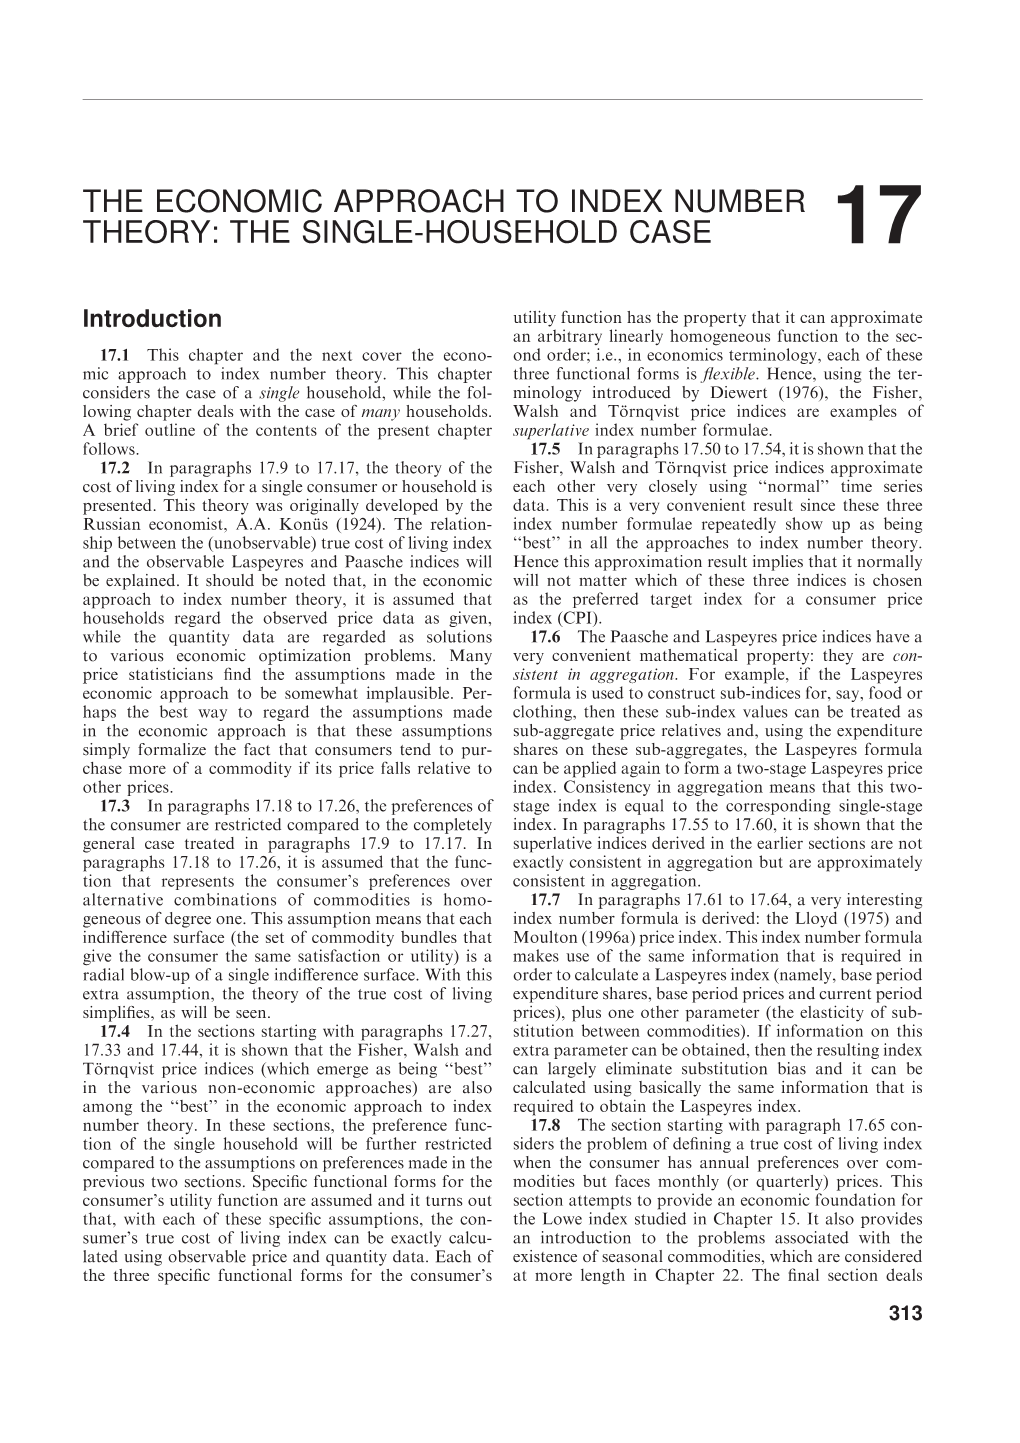 The Economic Approach to Index Number Theory: the Single-Household Case 17